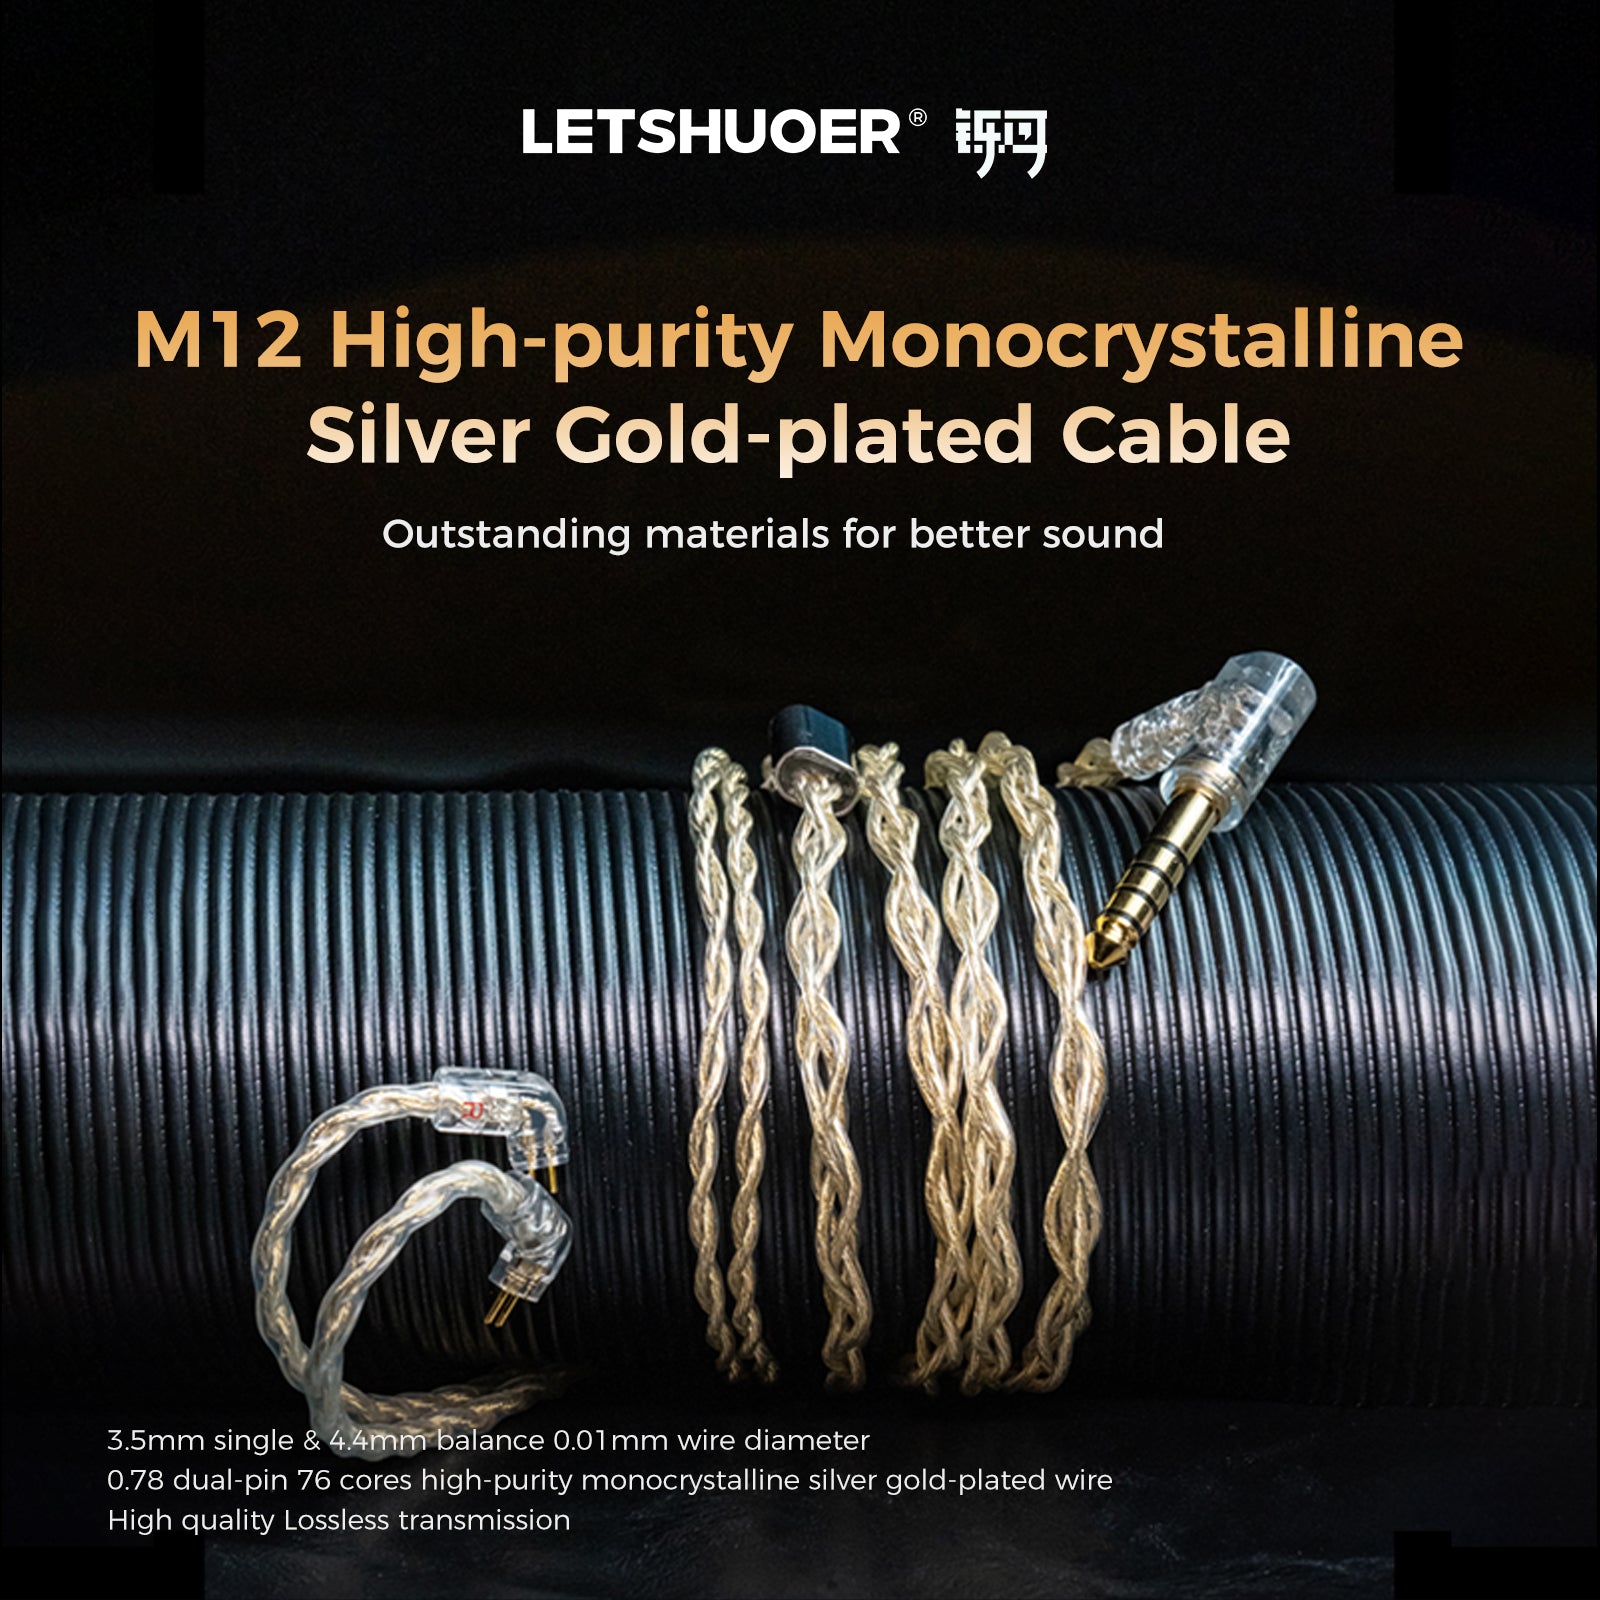 LETSHUOER M12 3.5mm single & 4.4mm balance  High-purity Monocrystalline Silver Gold-plated Cable 0.78 dual-pin 76 cores high-purity monocrystalline silver gold-plated wire